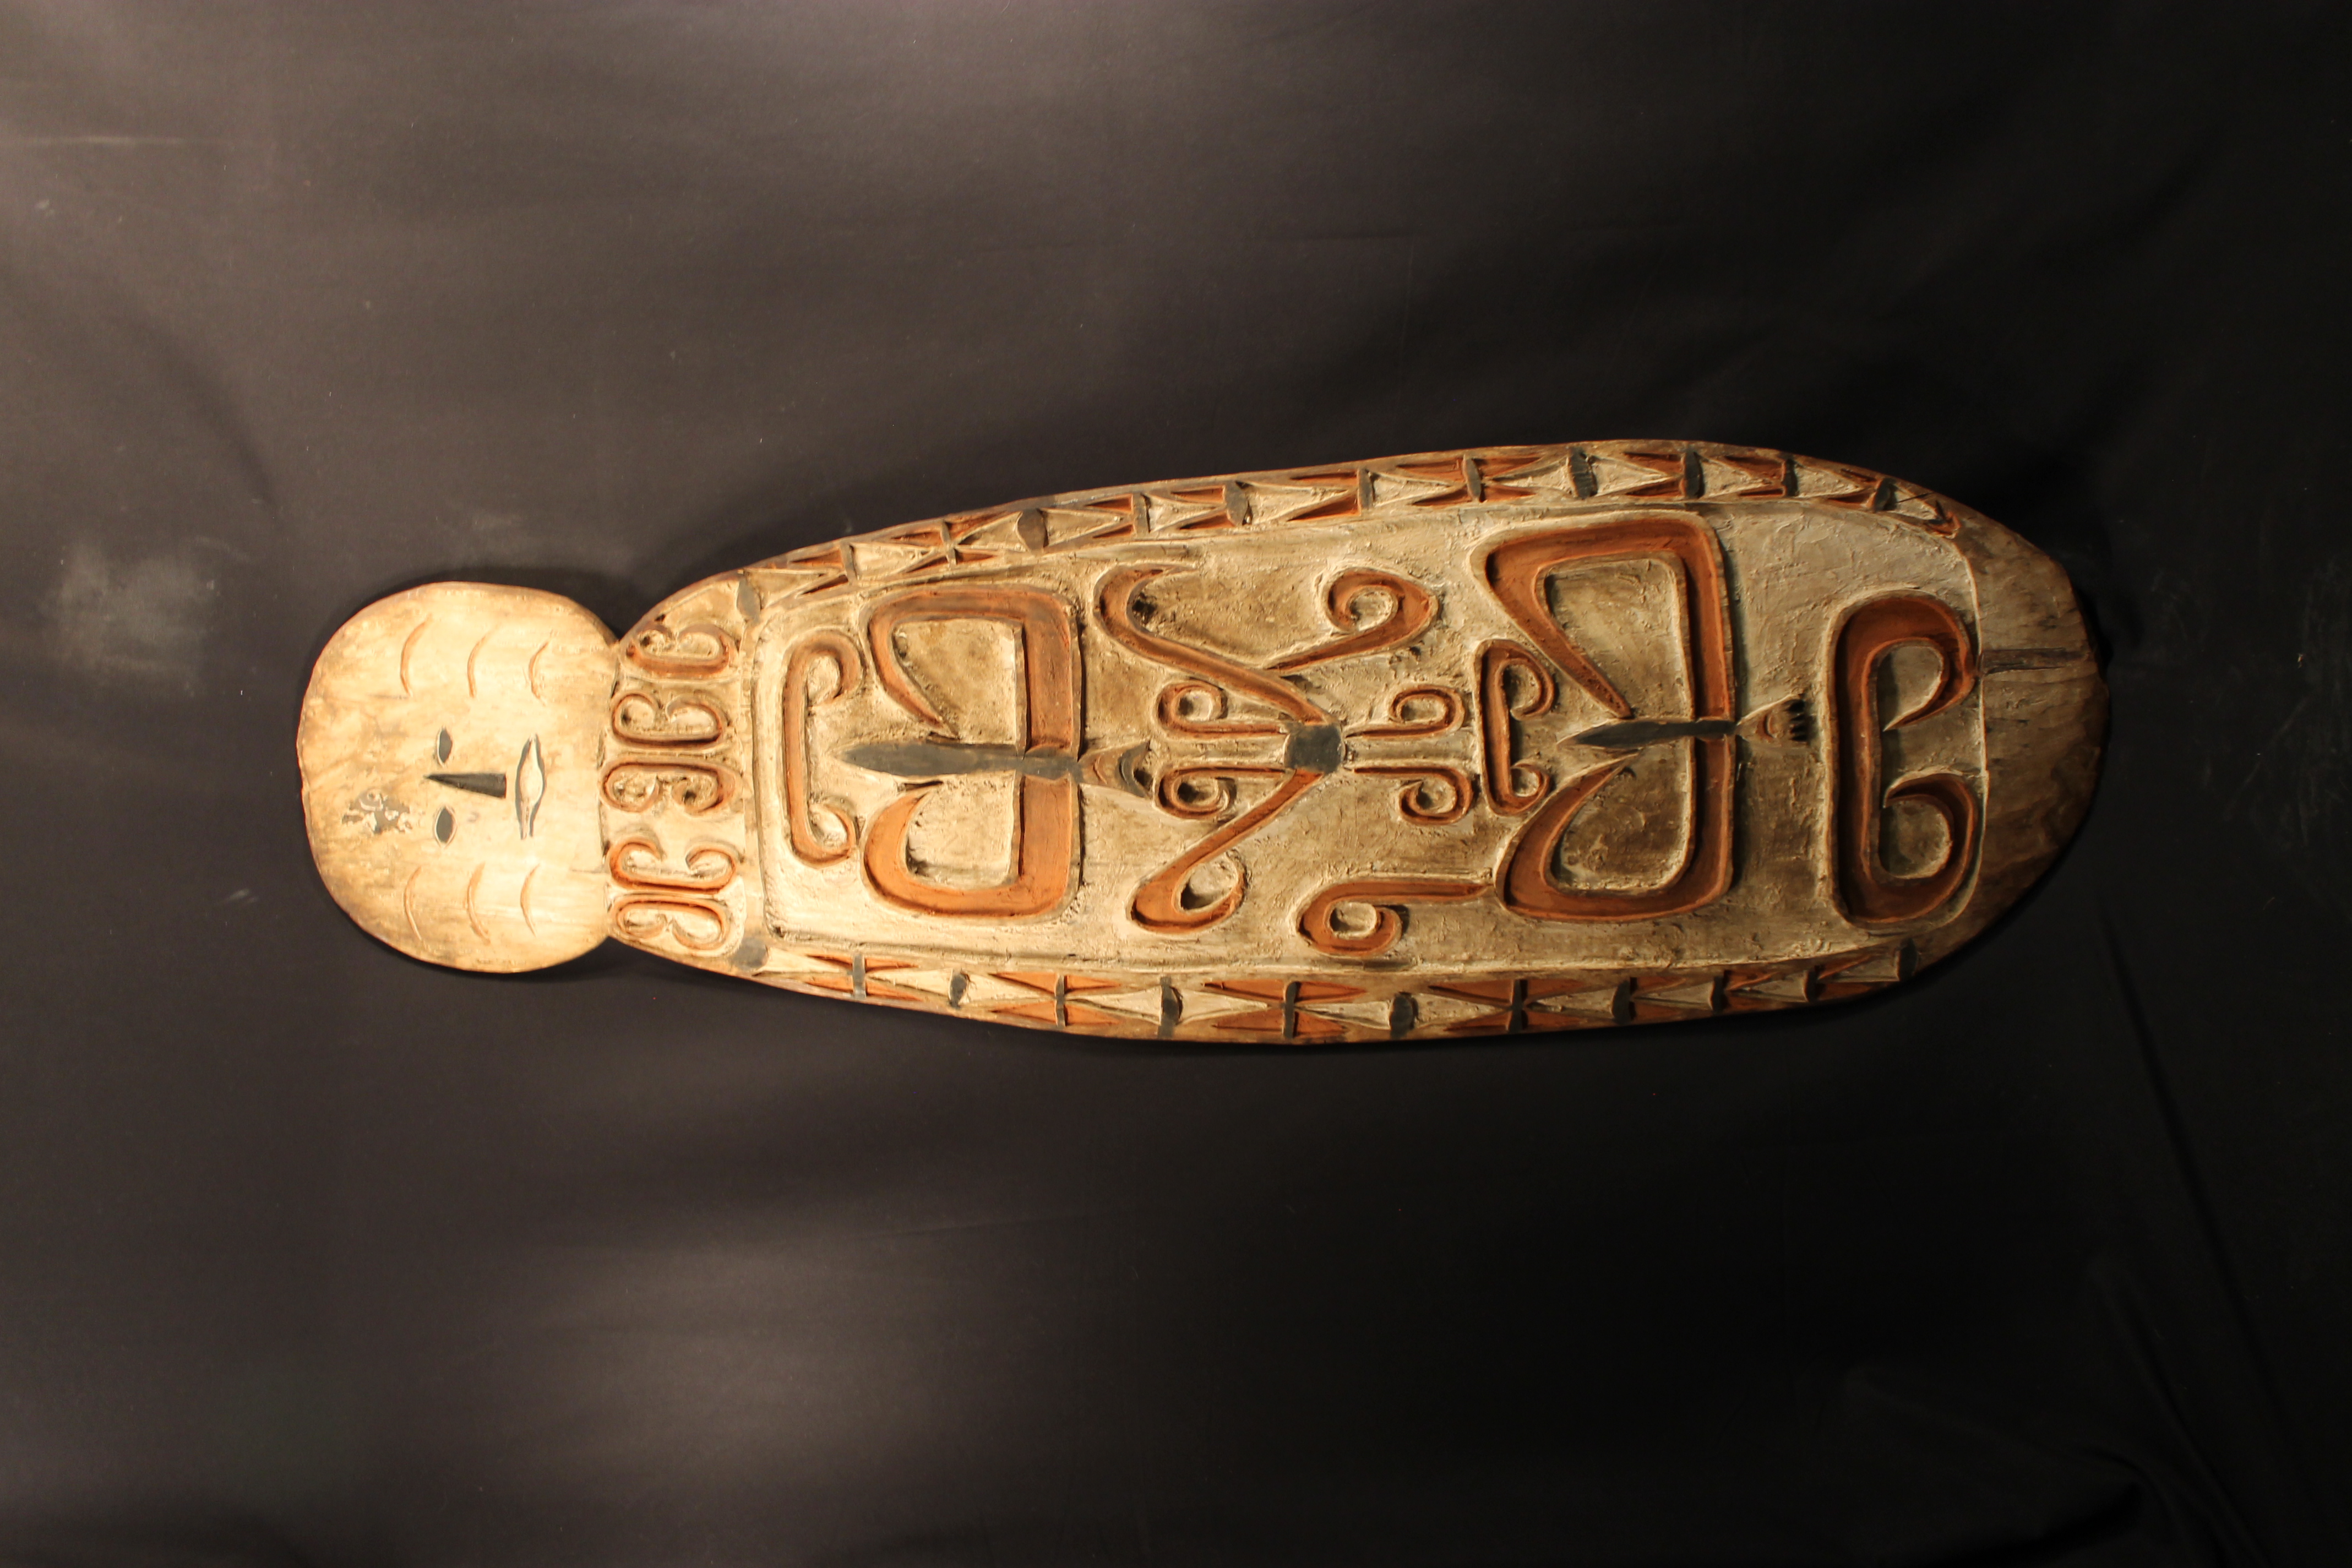 Large carved shield with “B” and “P” shaped designs. The shield has a face carved into the top.